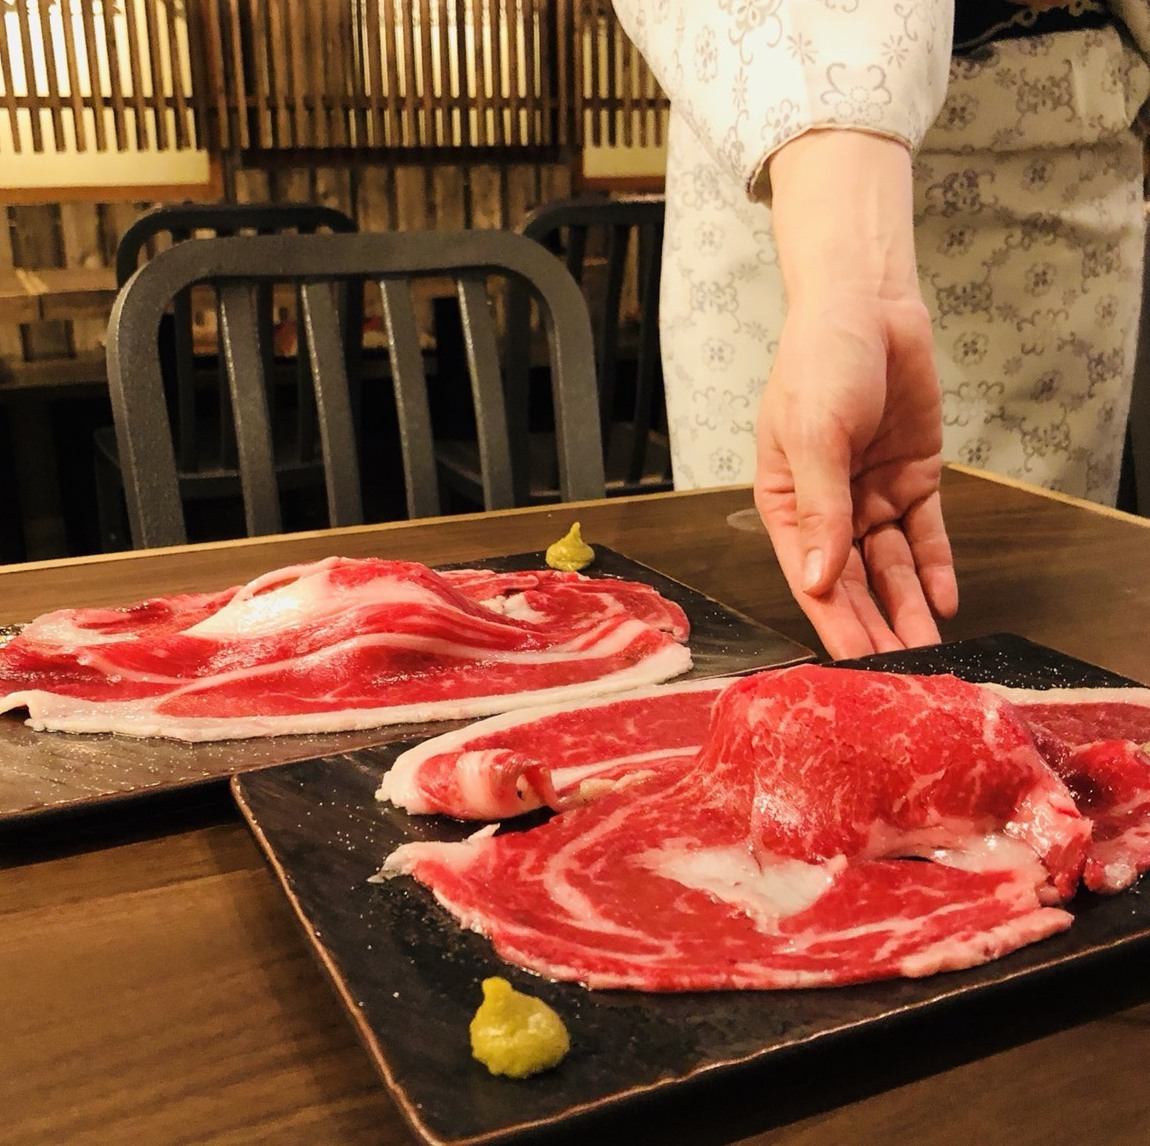 Enjoy delicious meat from all over the country in a private room inspired by the Taisho era.